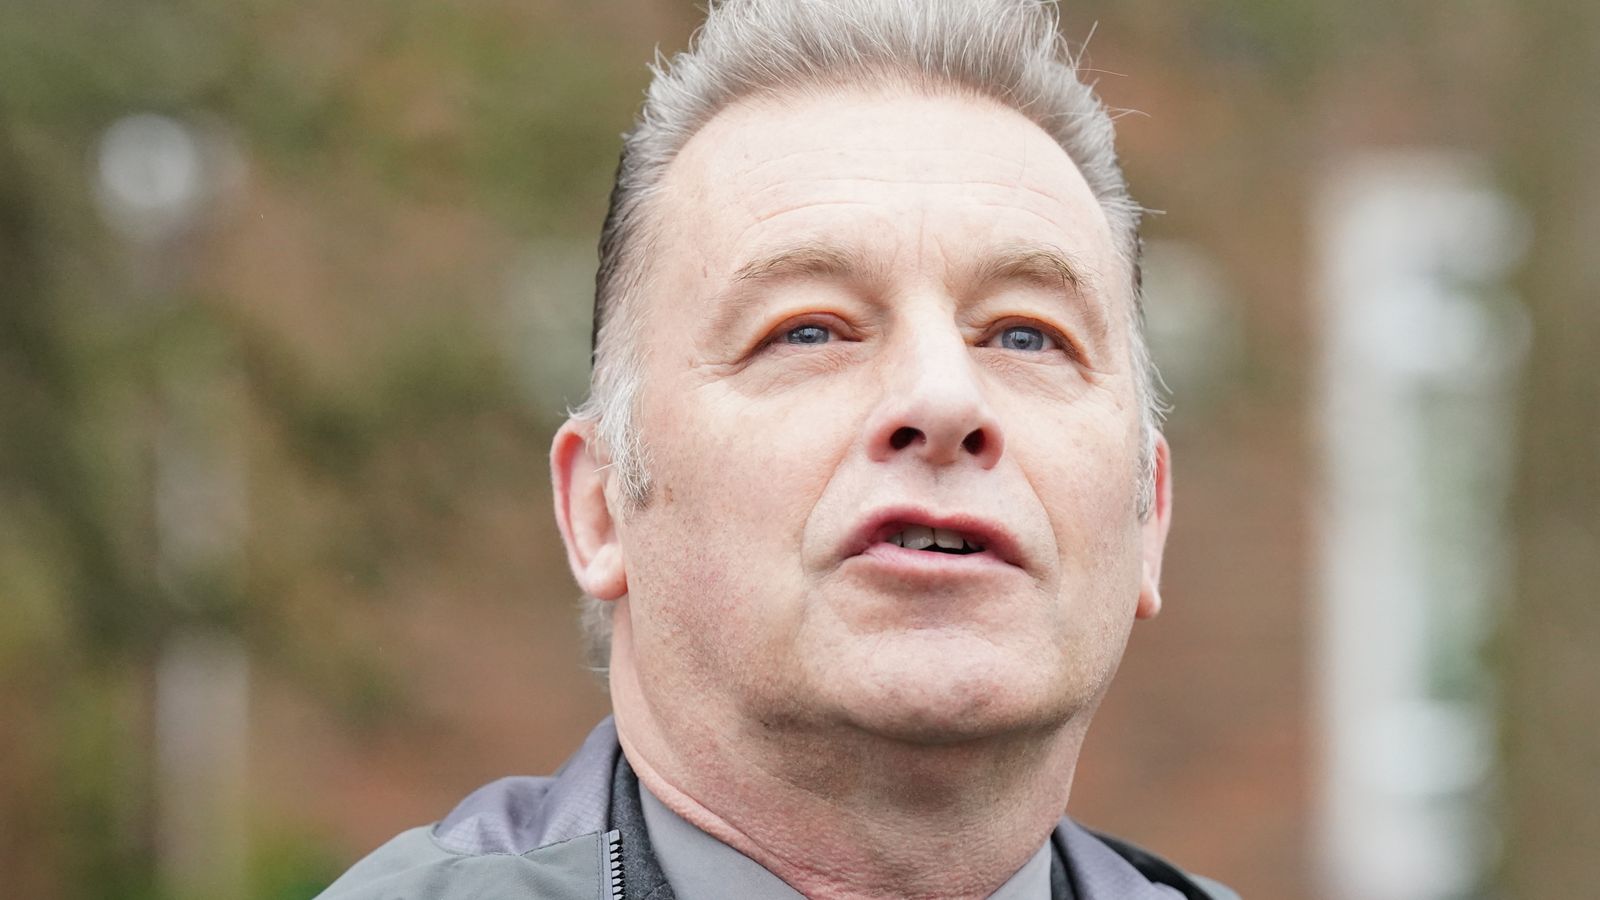 chris packham not drinking any more heineken' after thousands of apple trees felled